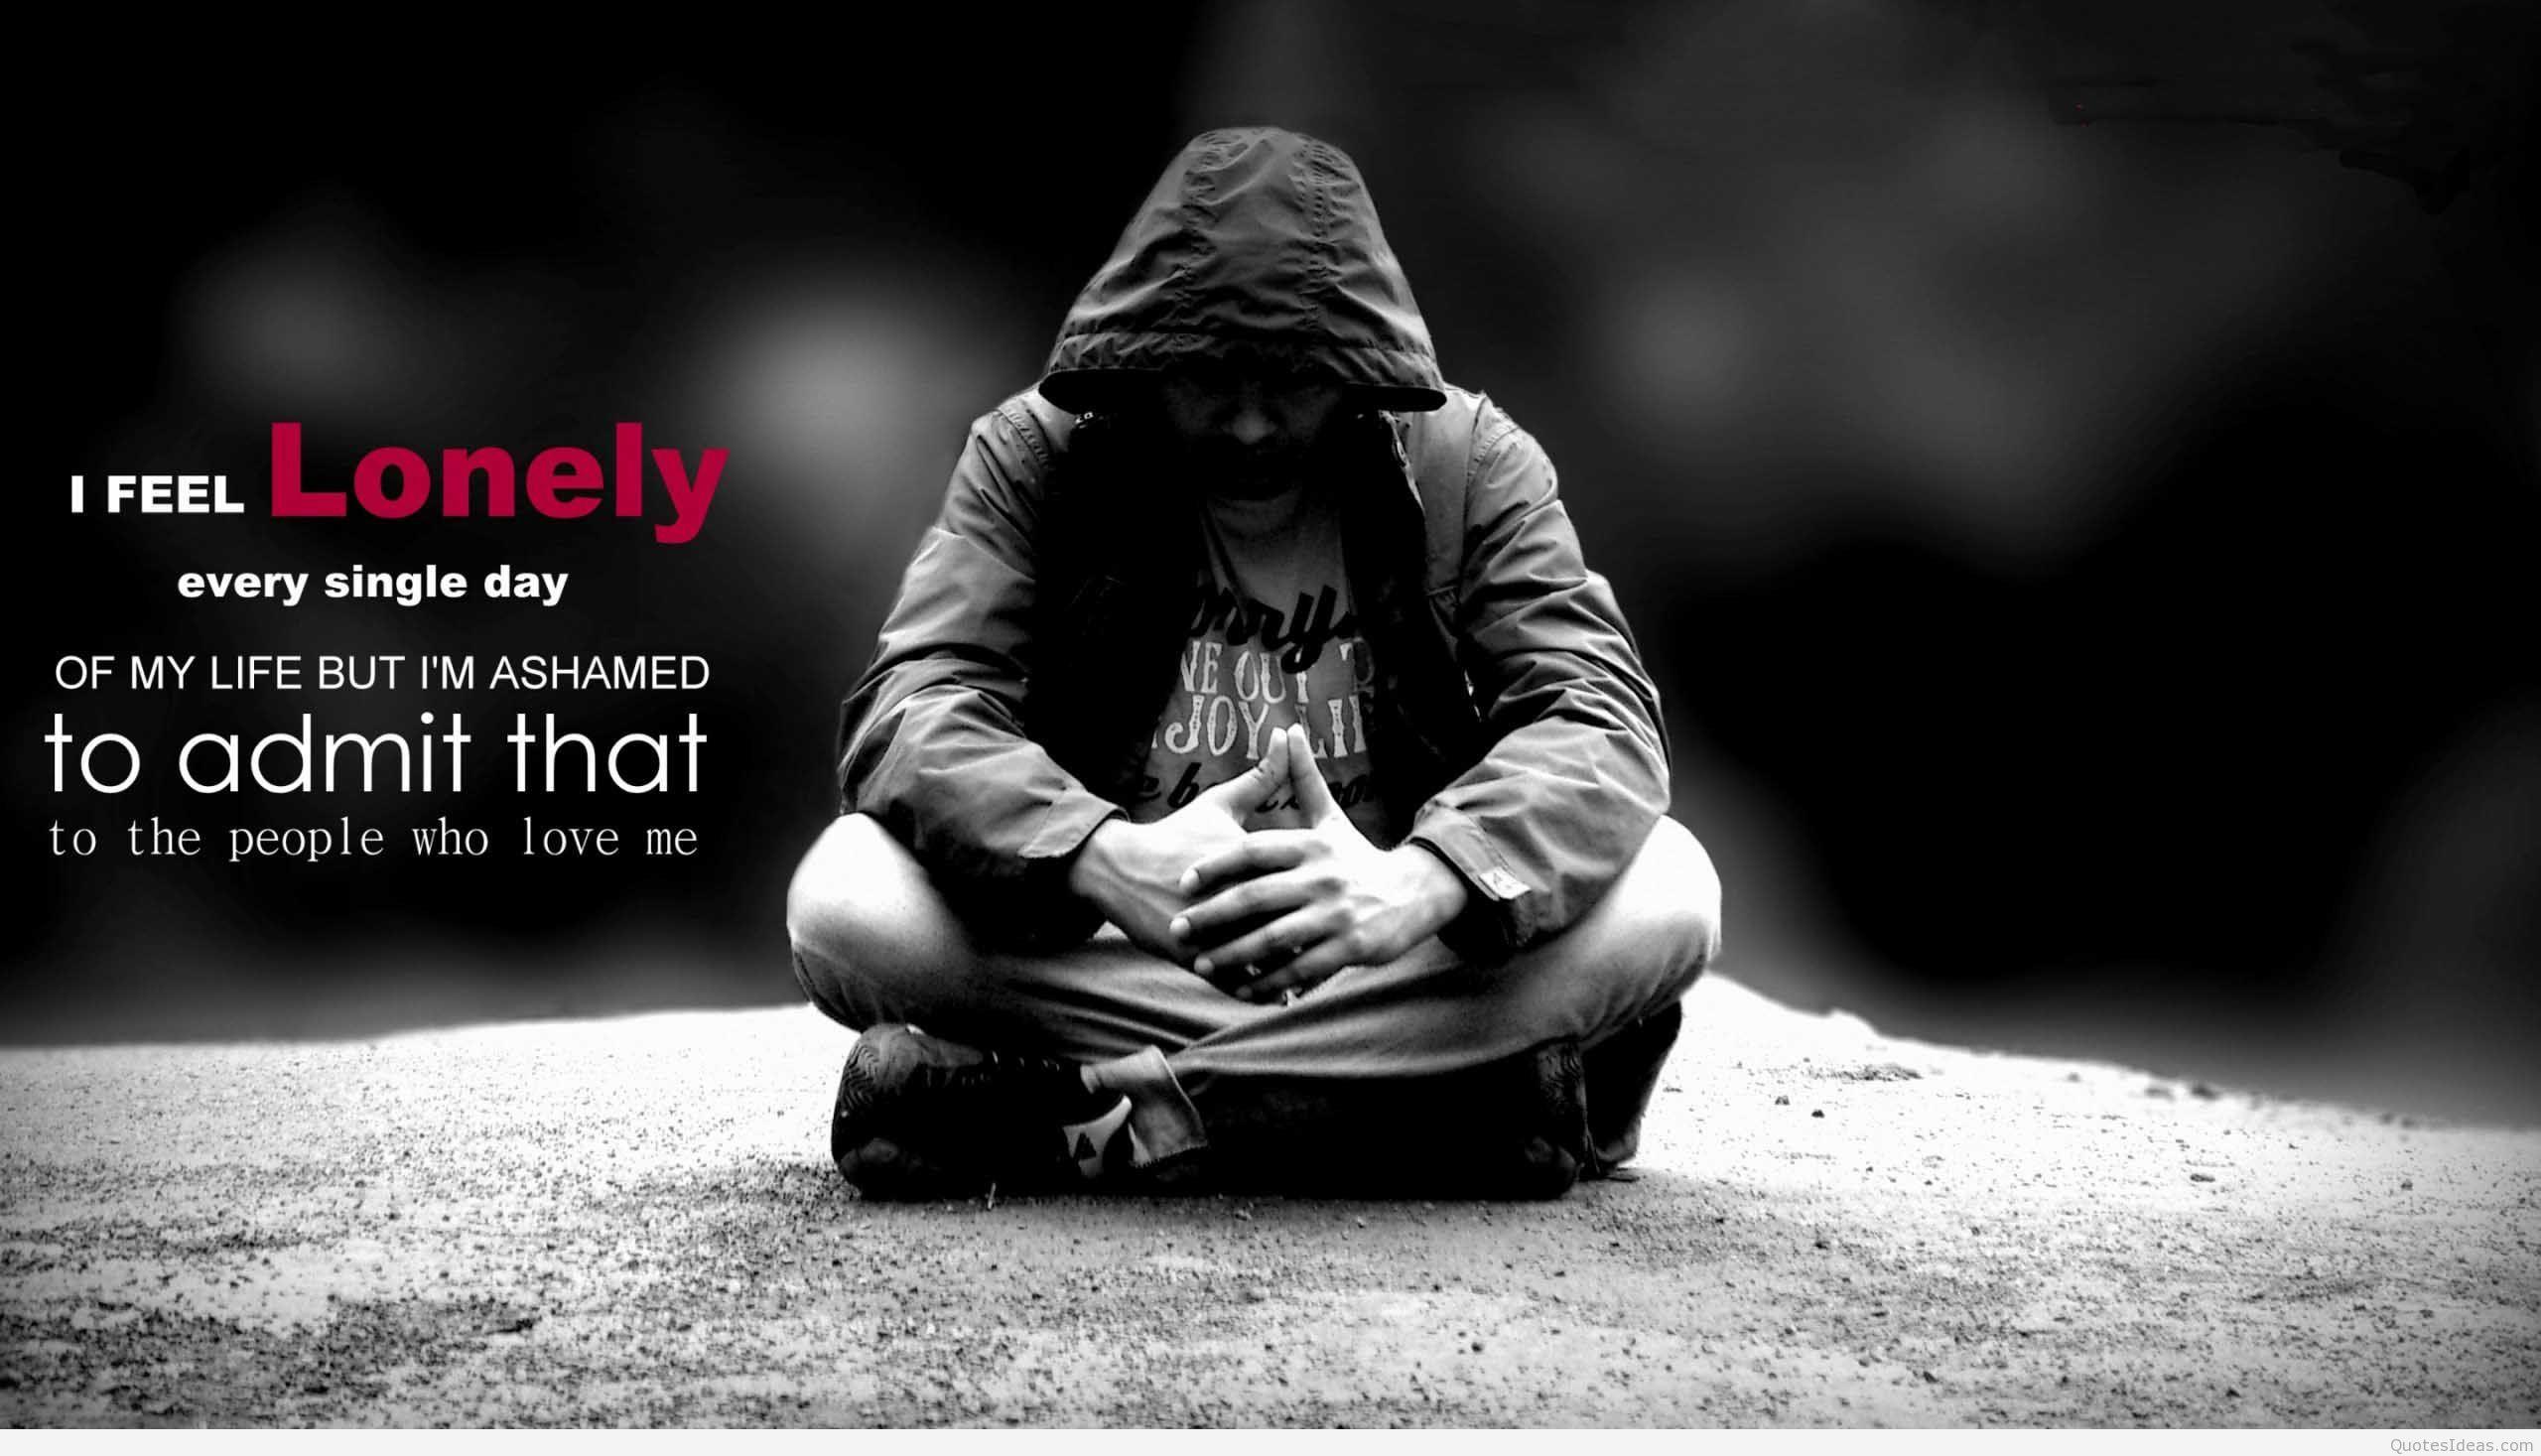 Sad Alone Boy Wallpaper Image With Quotes Inspiring Quotes